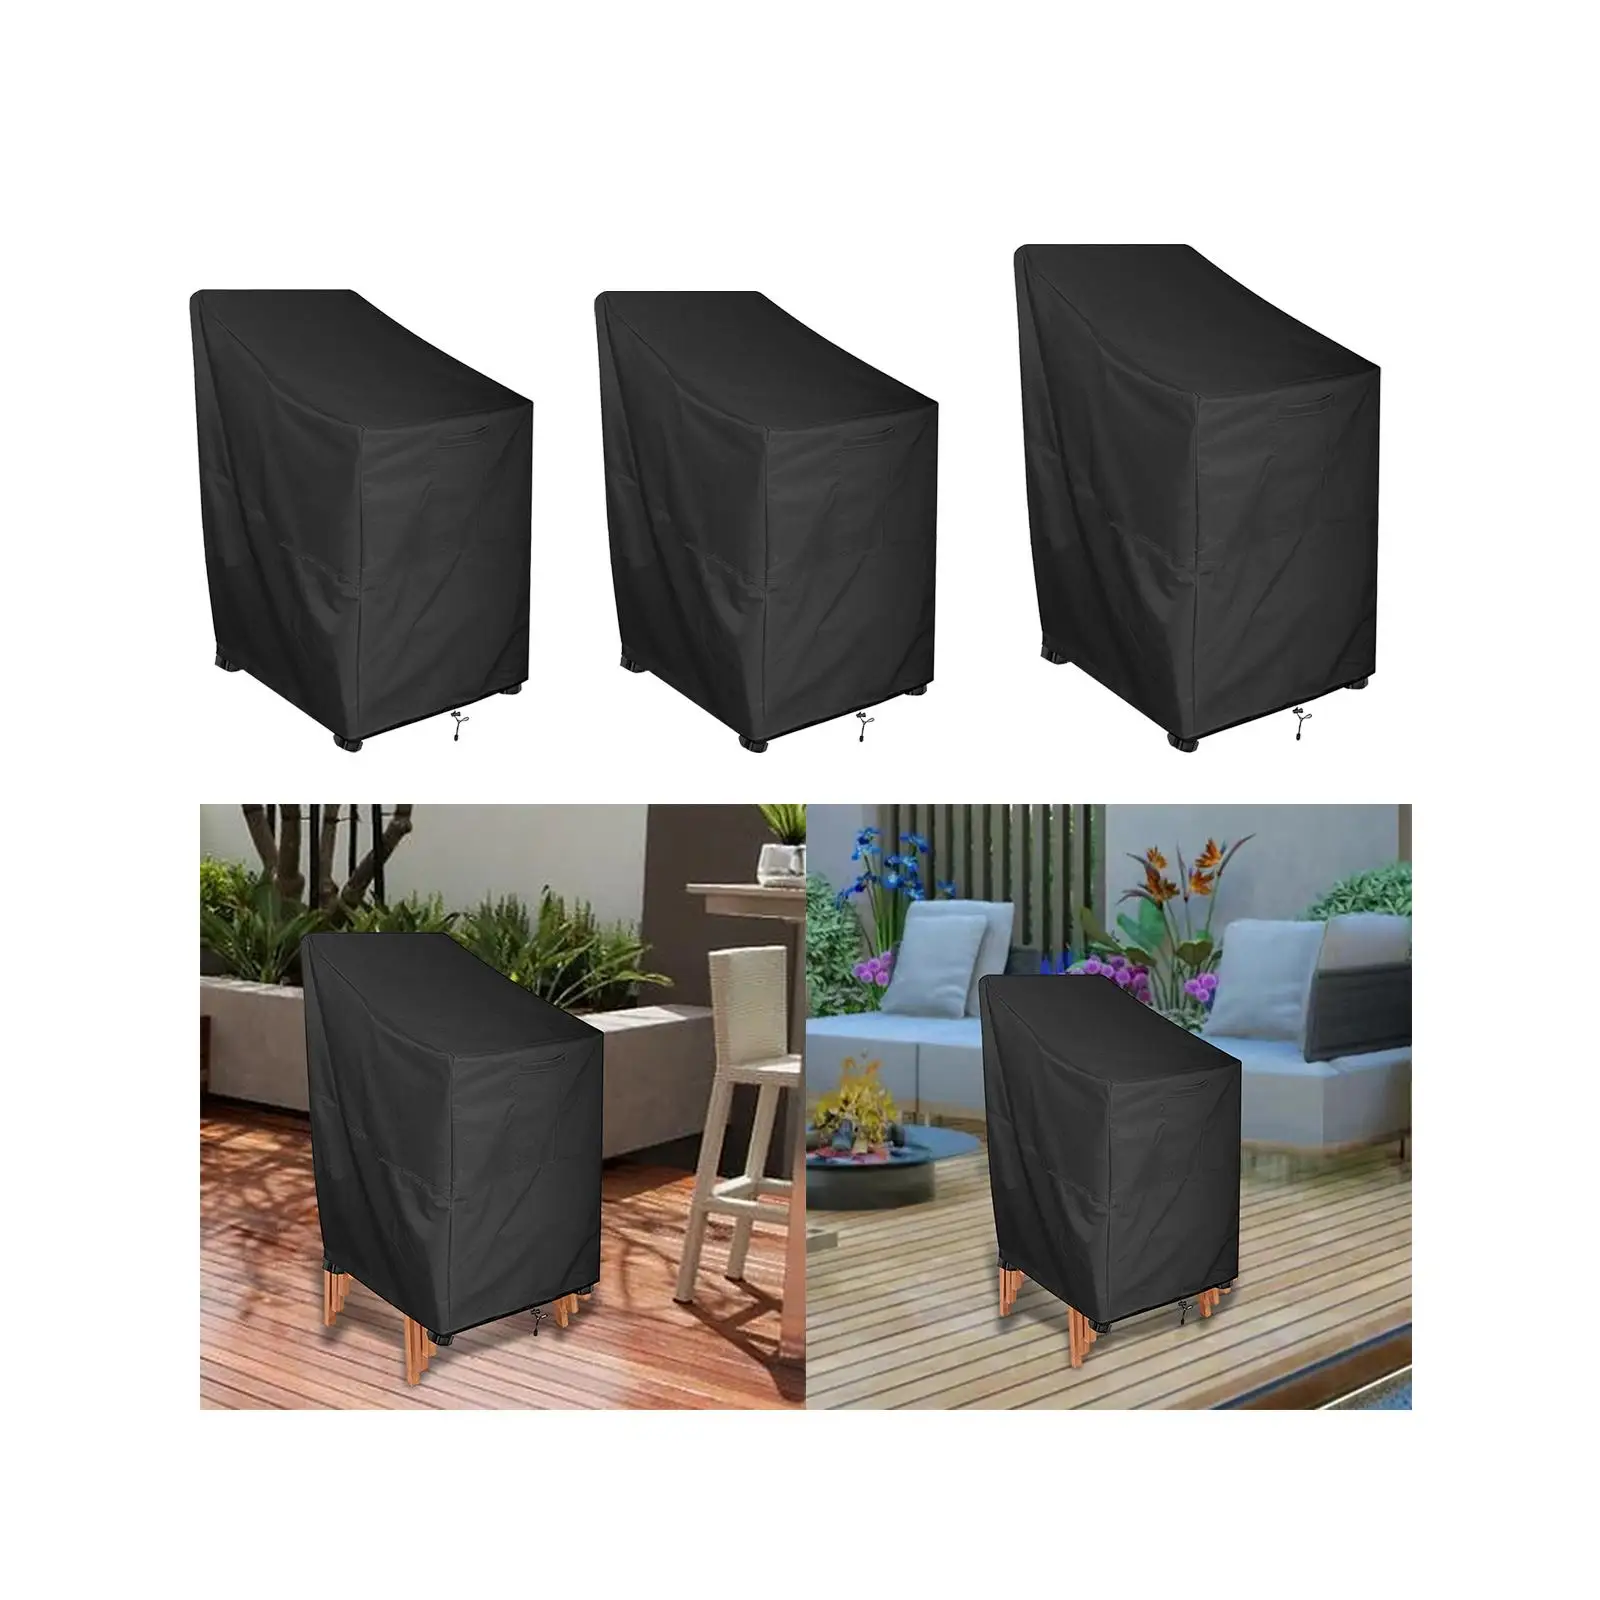 Folding Chairs Cover High Back Chair Covers Protection Cover Heavy Duty Deep Seat Cover Water Resistant Stackable Chair Covers